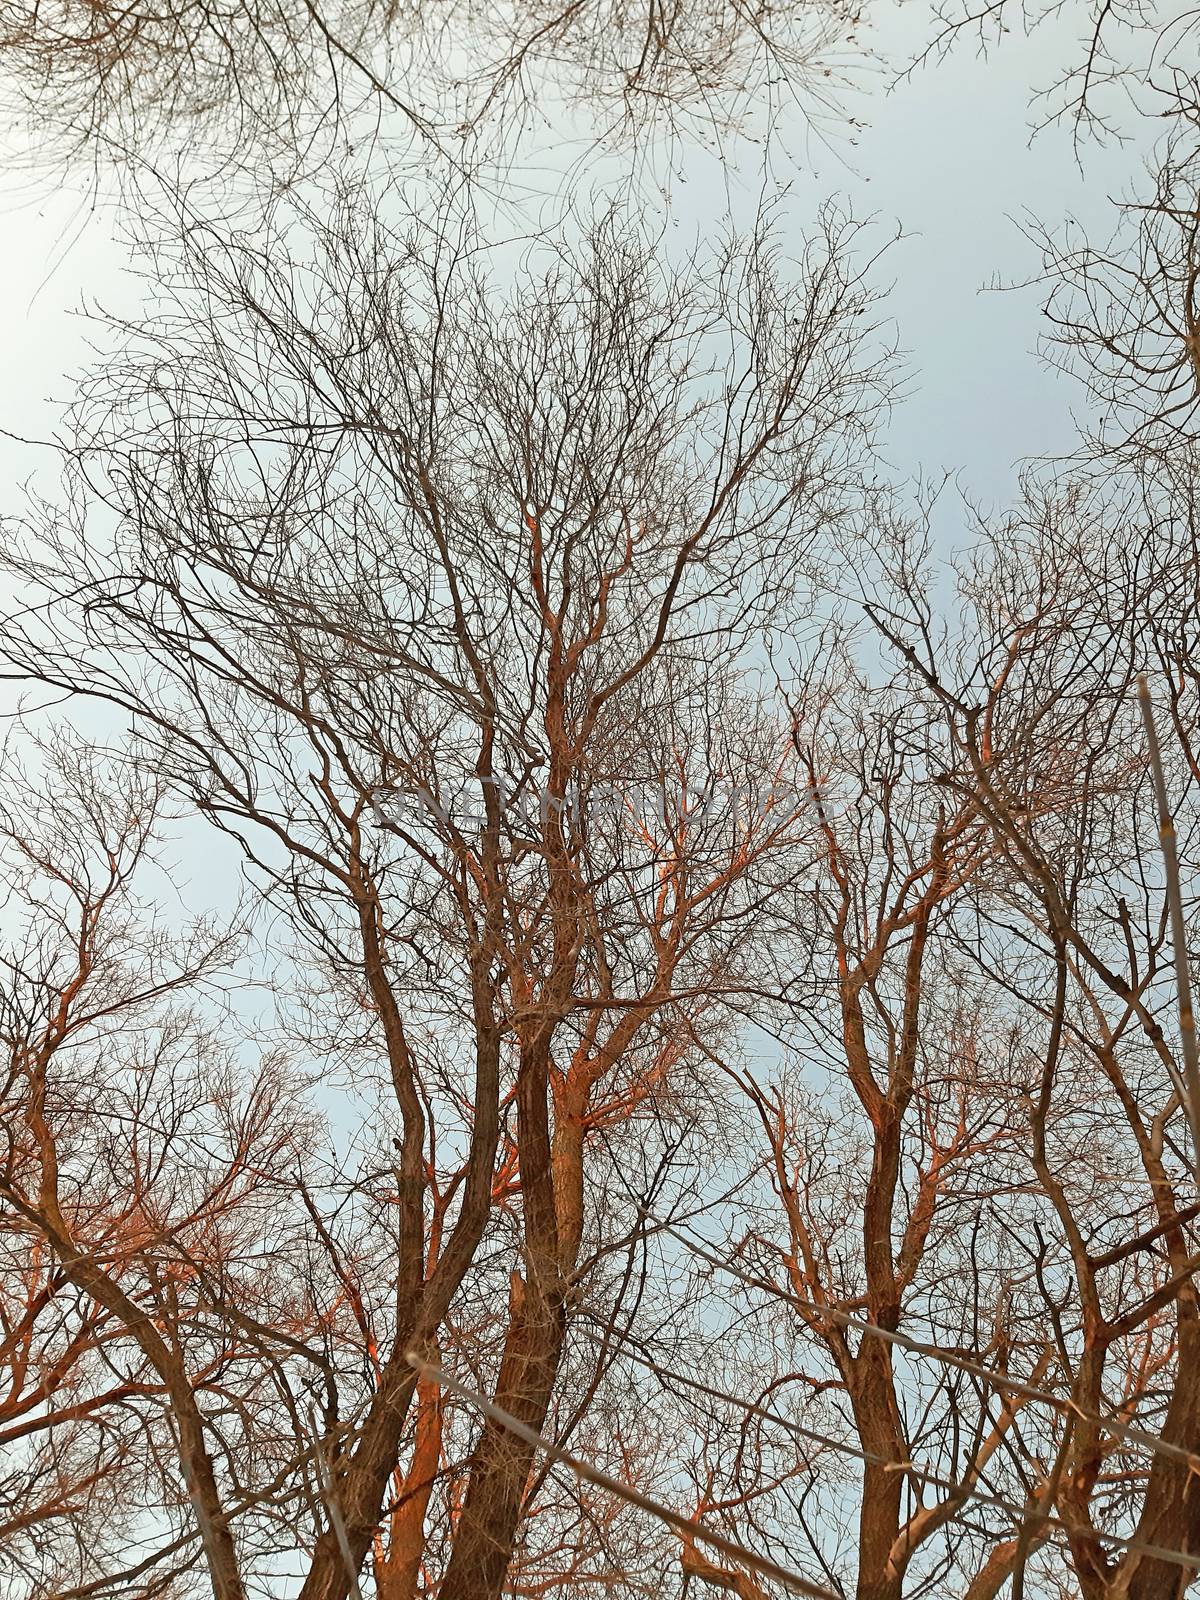 Trees, branches on clear sky in winter.